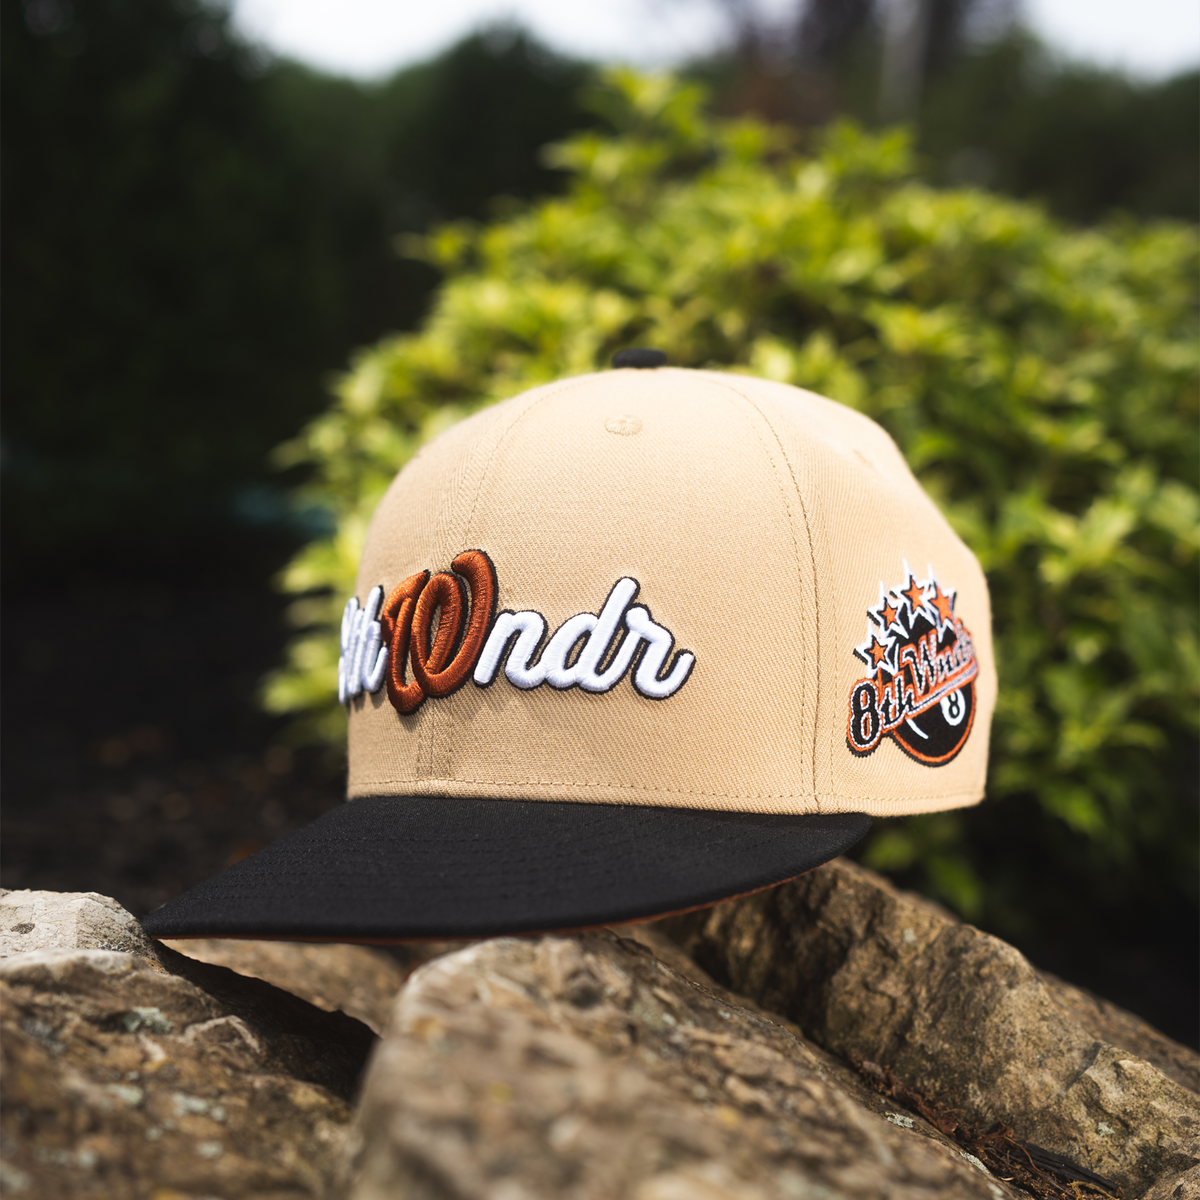 FITTED HAT COPPER / BLACK